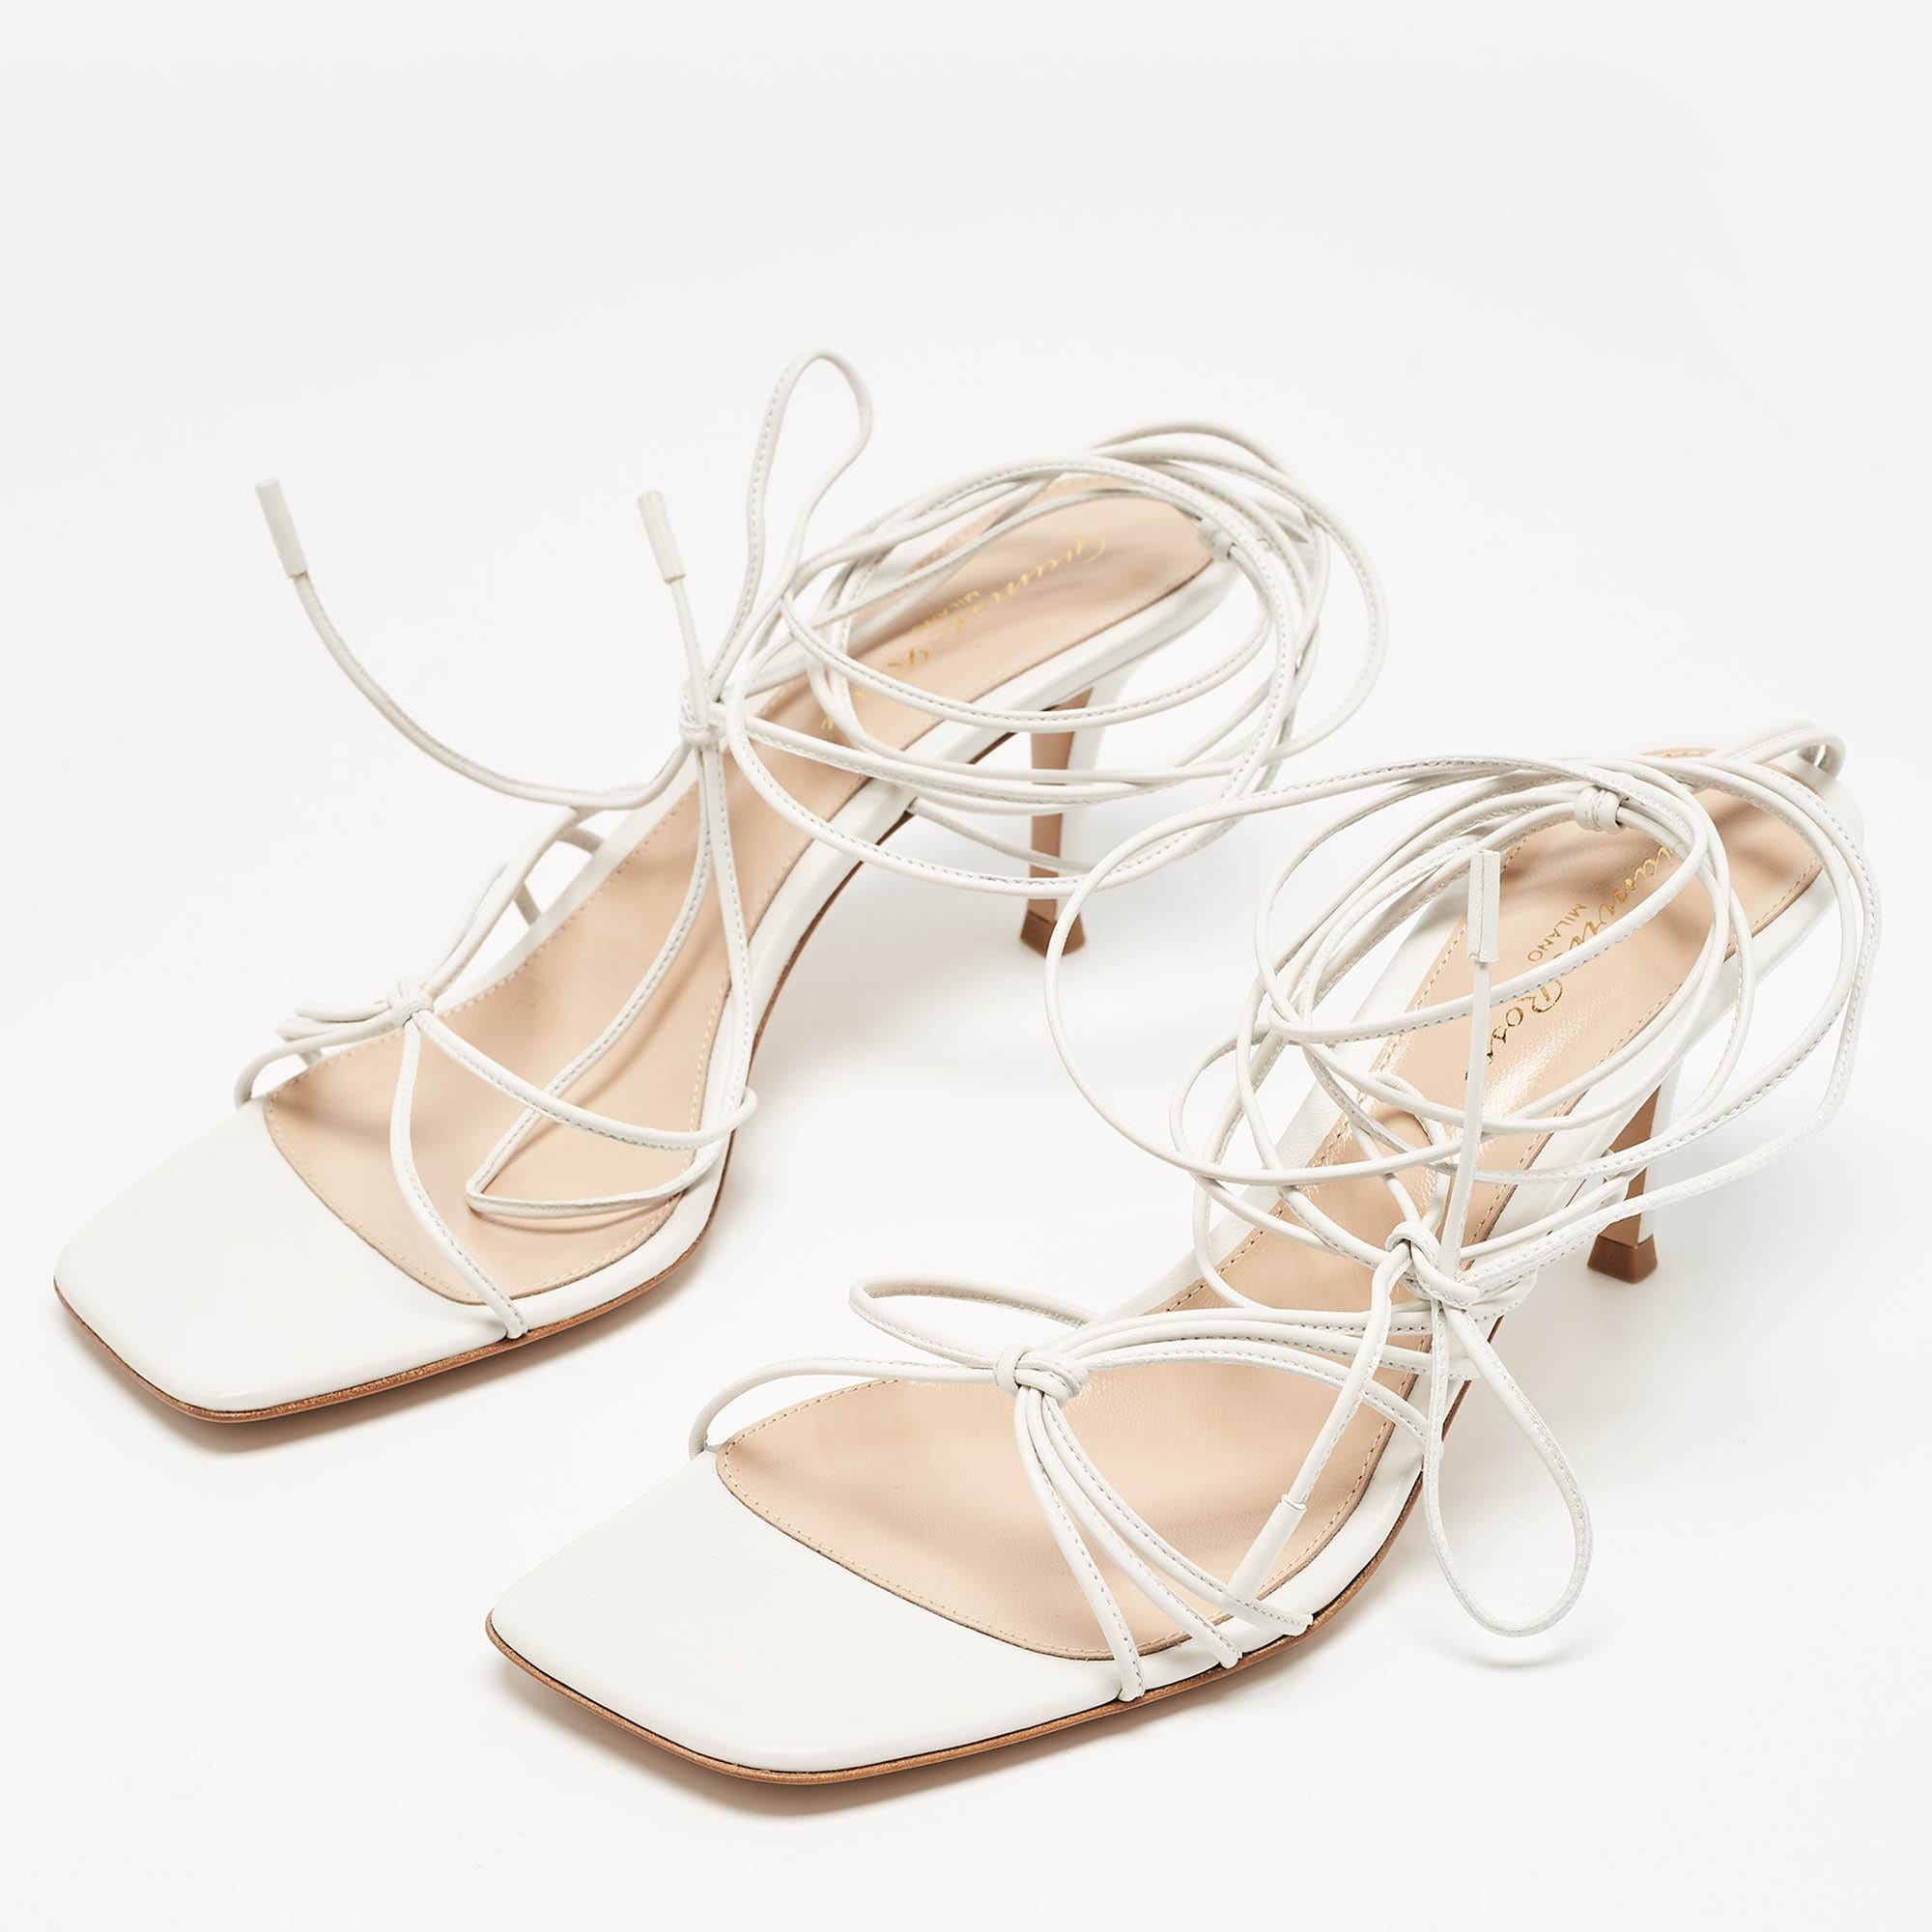 Gianvito Rossi White Leather Sylvie Sandals Size 38.5 For Sale 2